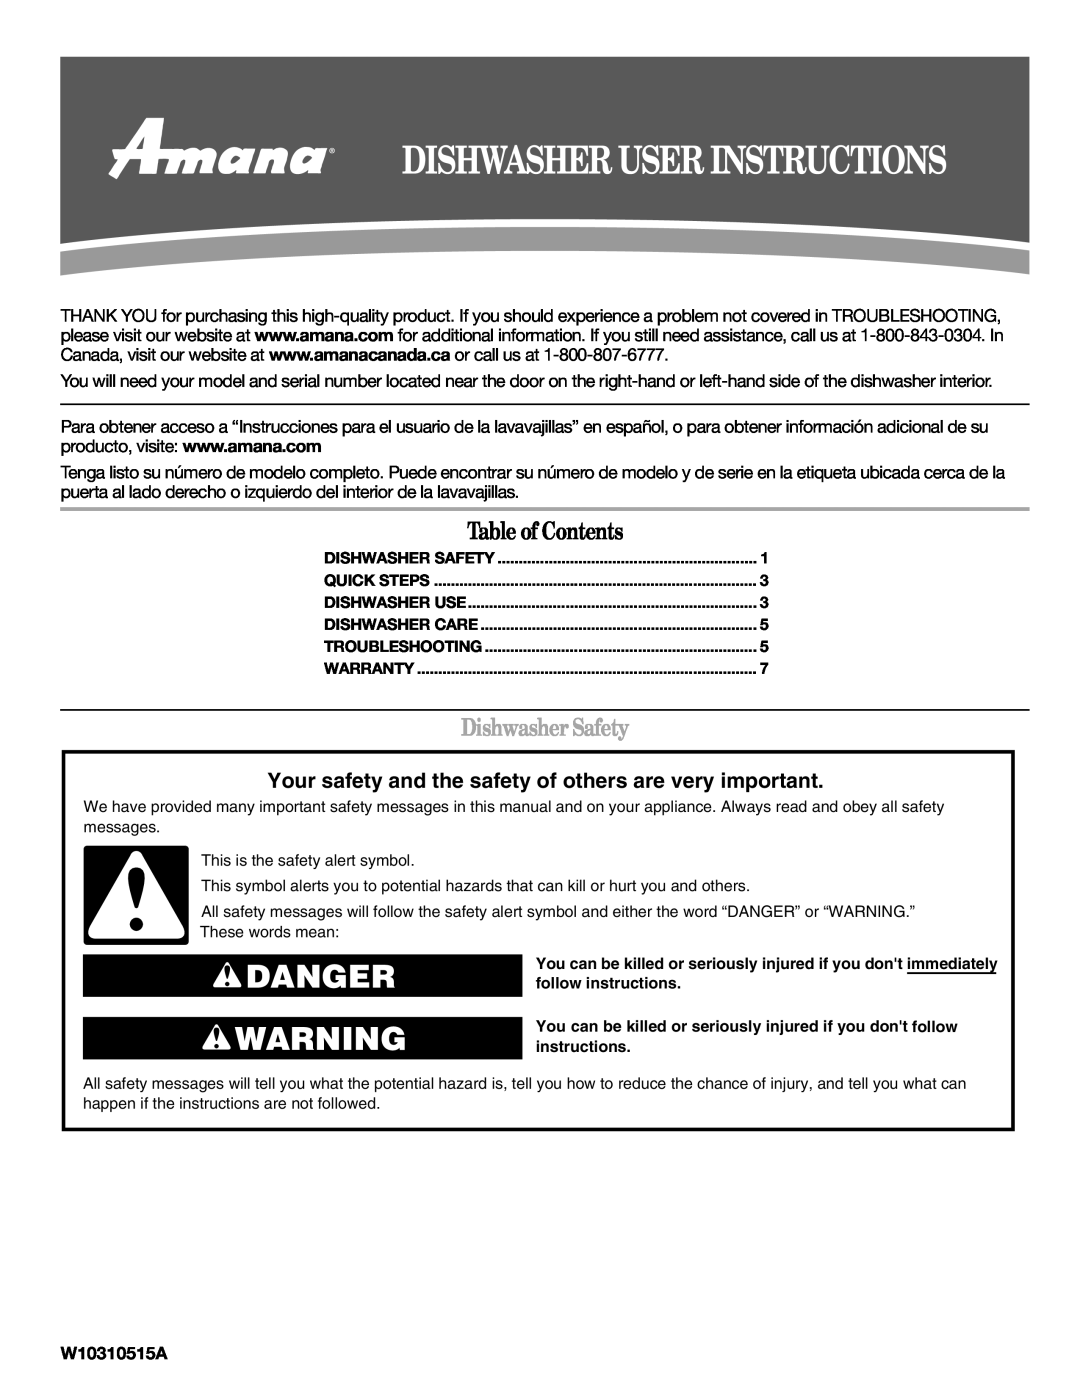 Amana W10310515A warranty Dishwasher User Instructions, Danger, Table of Contents, Dishwasher Safety 